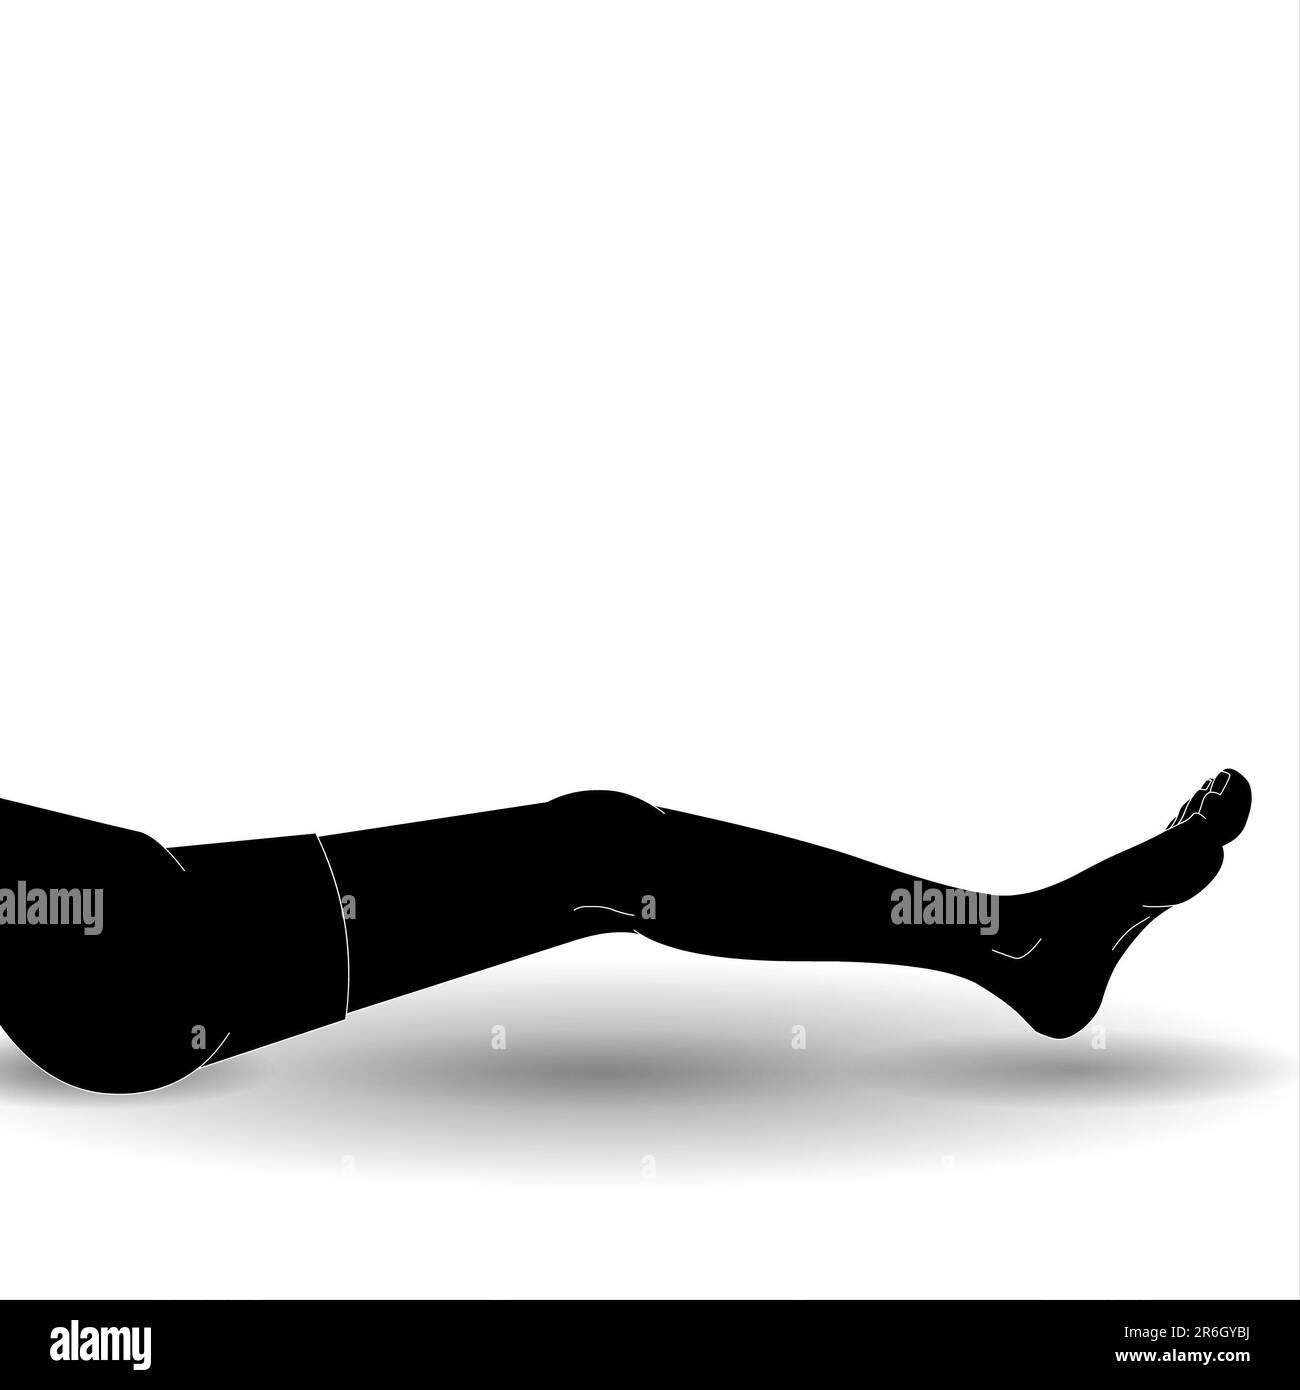 Illustration of legs of a young man lying down on the floor Stock Photo